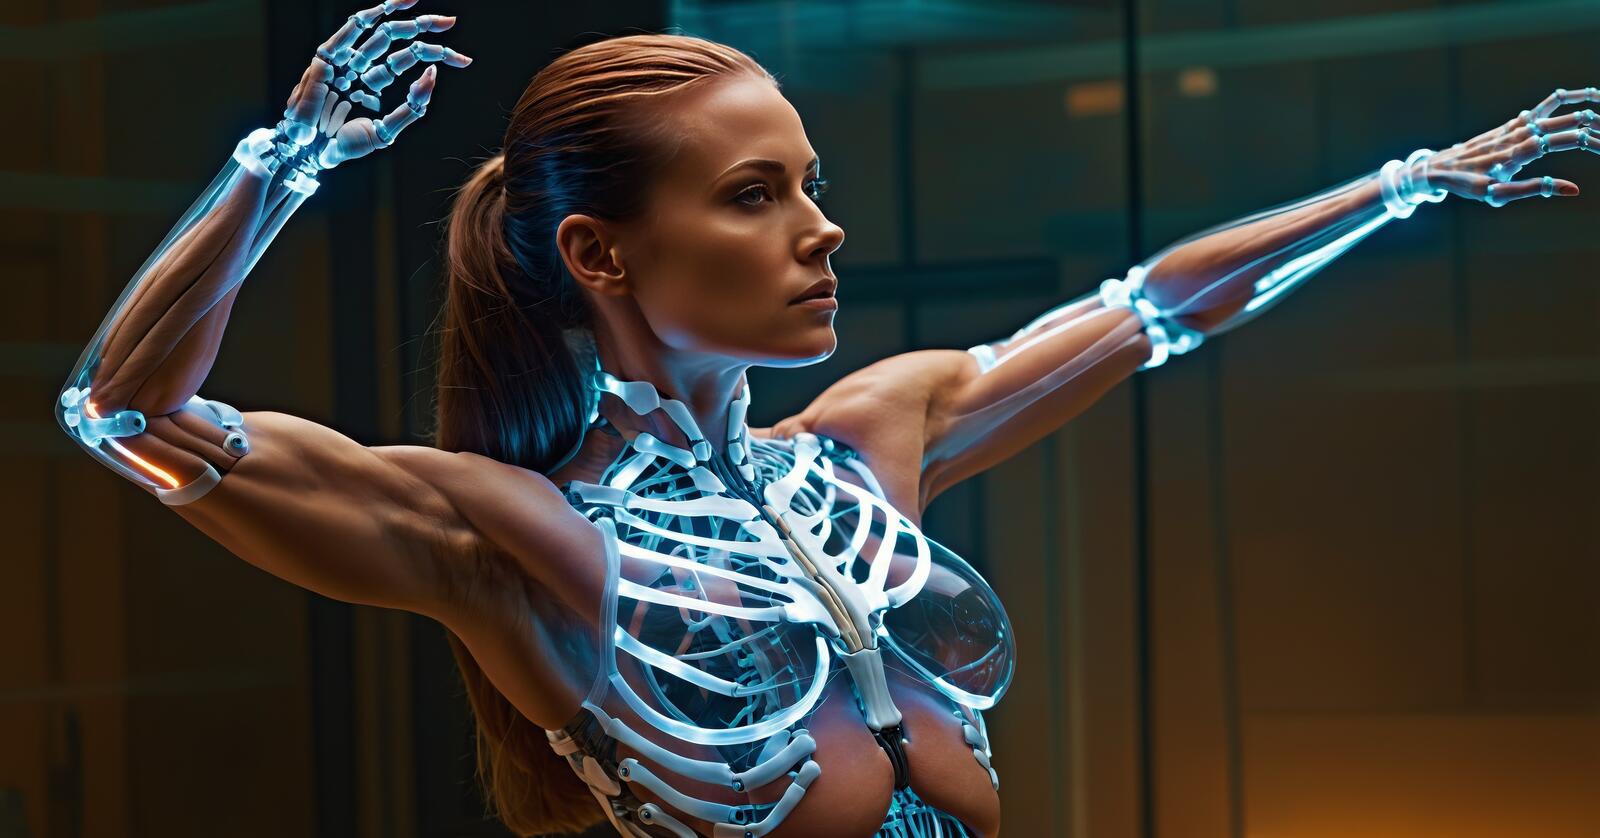 Free photo Futuristic woman in white with glowing torso and arms